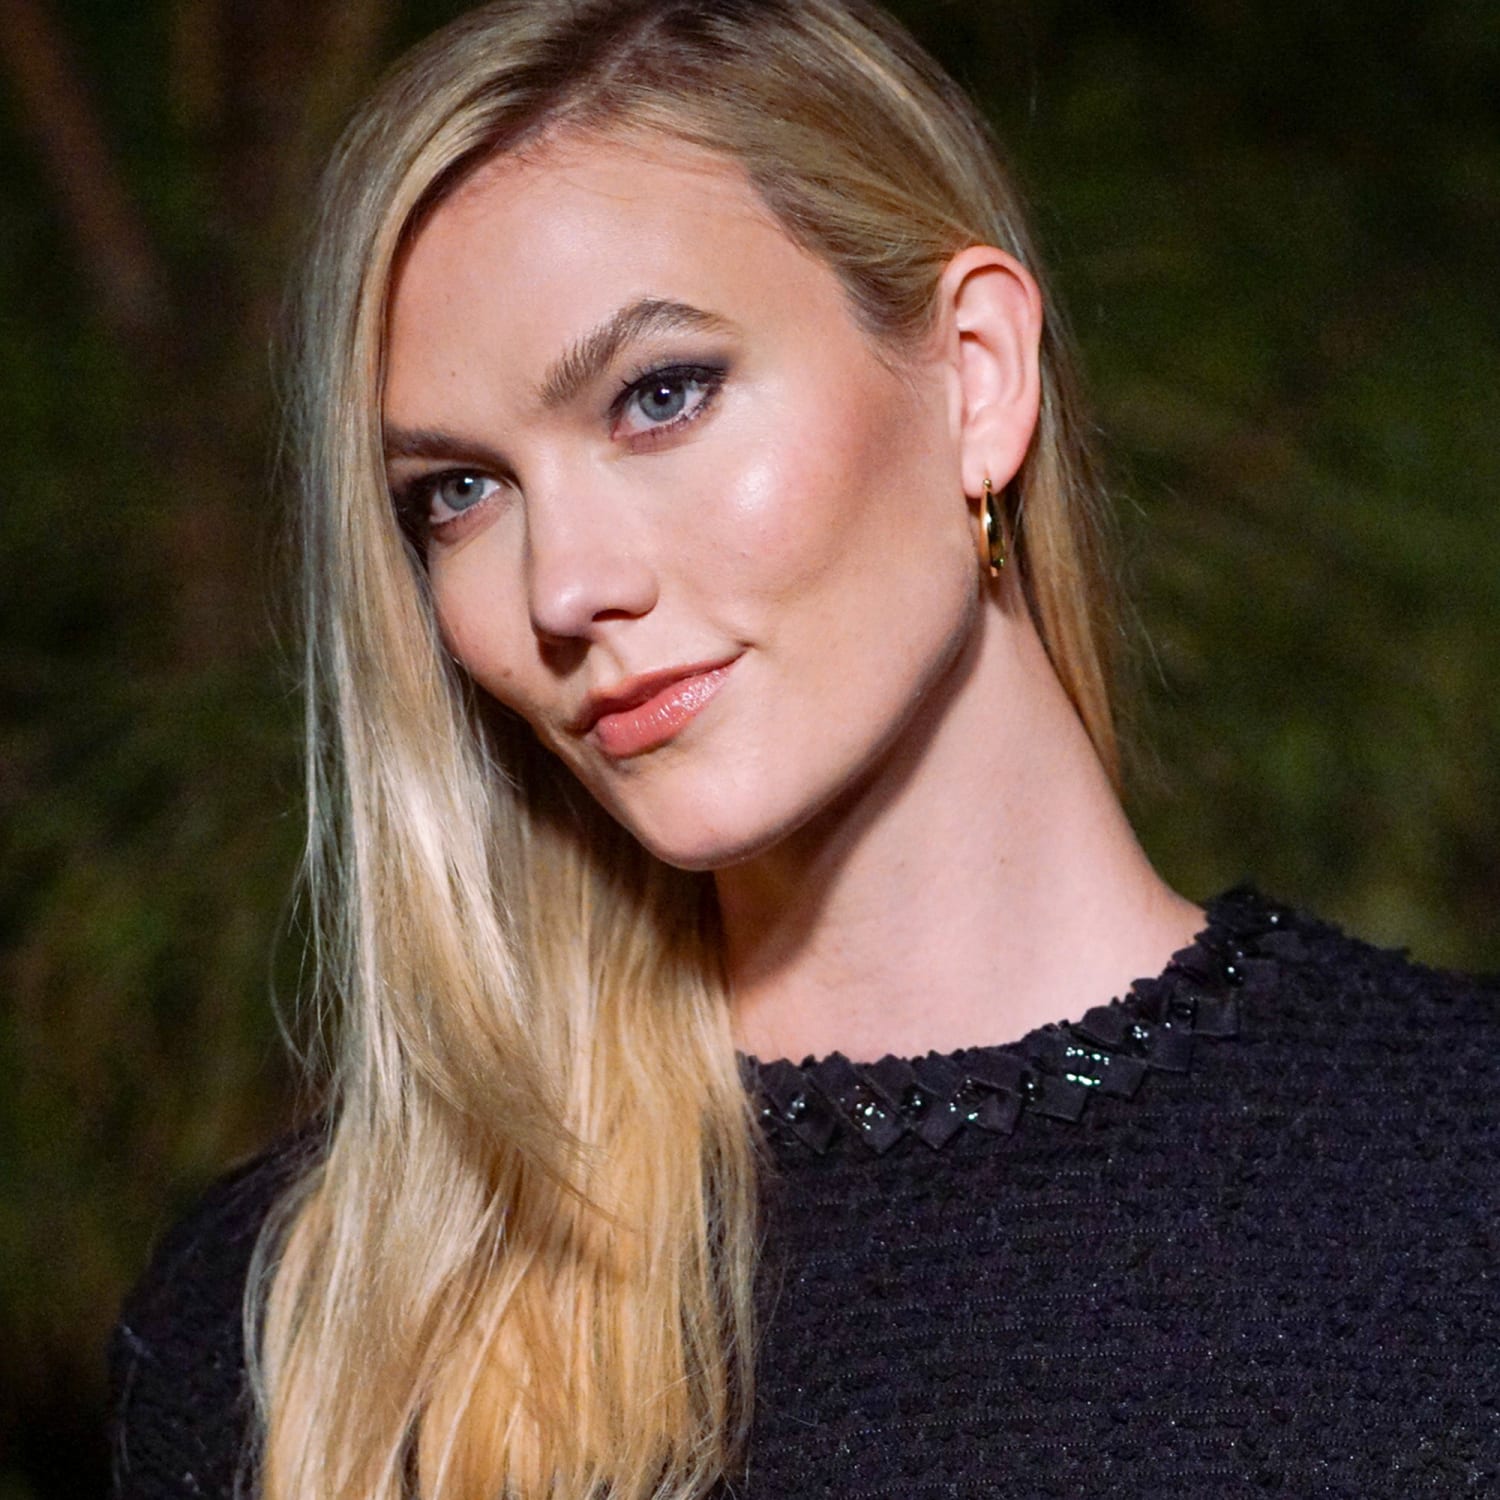 EVENT] How to get the KARLIE KLOSS HAIR in FASHION KLOSSETTE